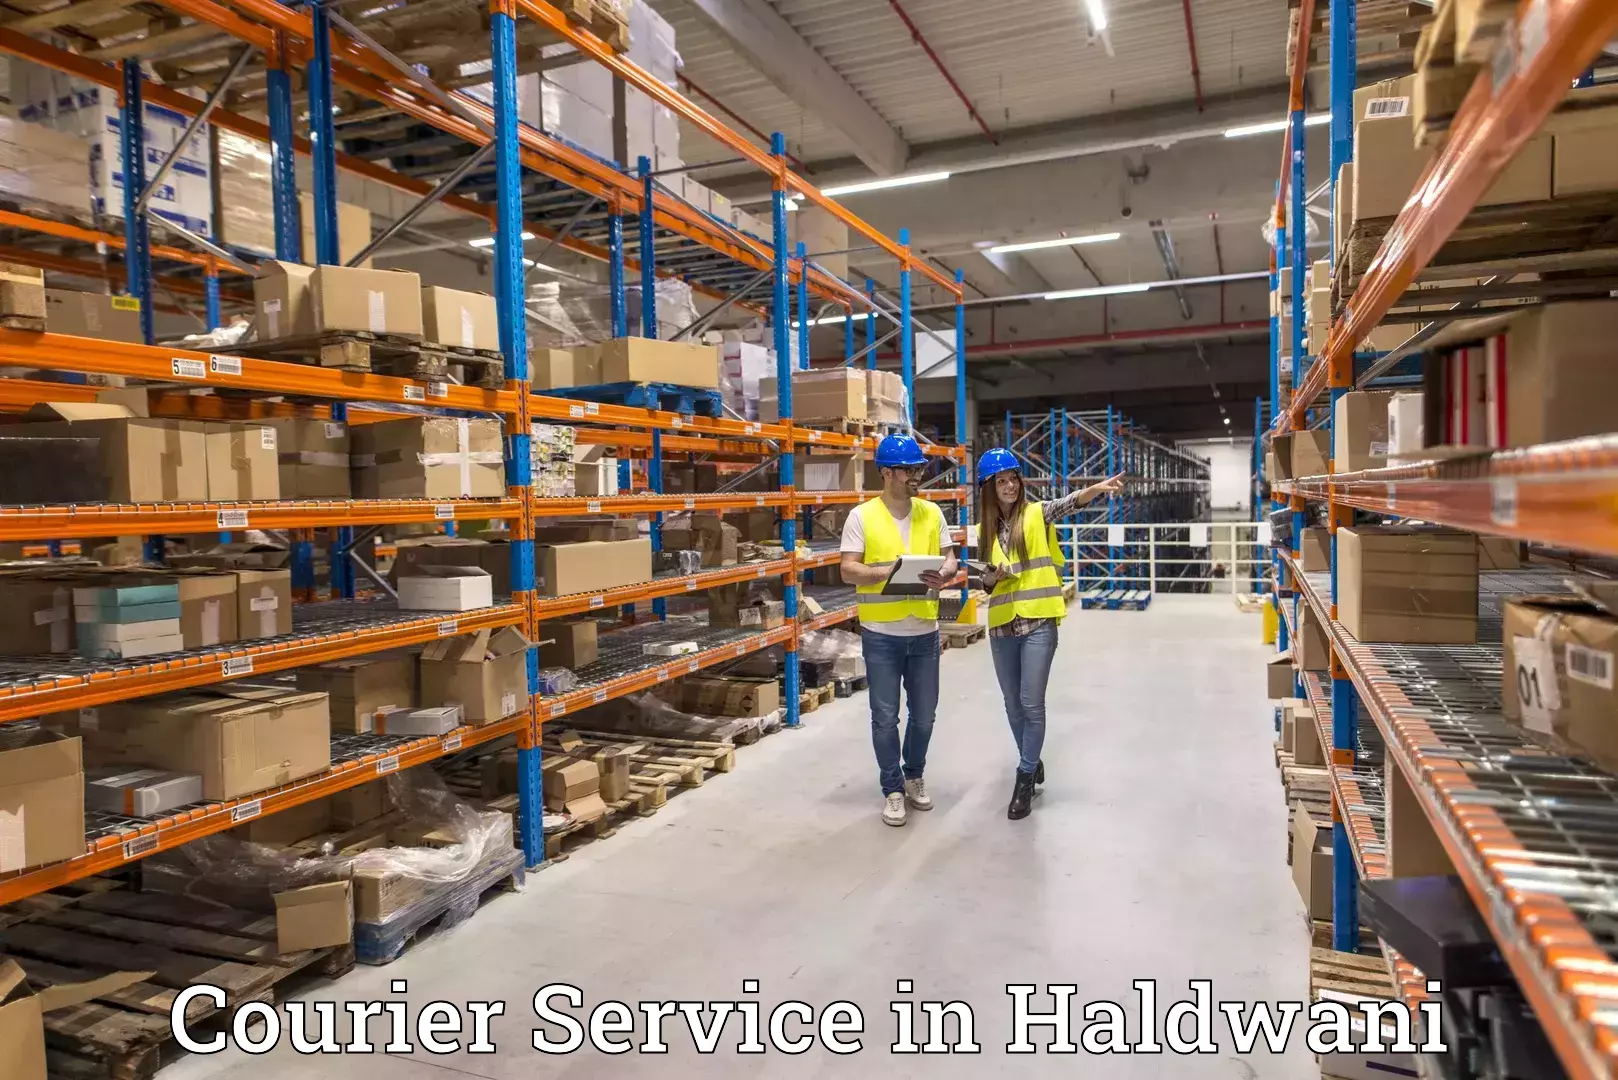 Quality courier services in Haldwani